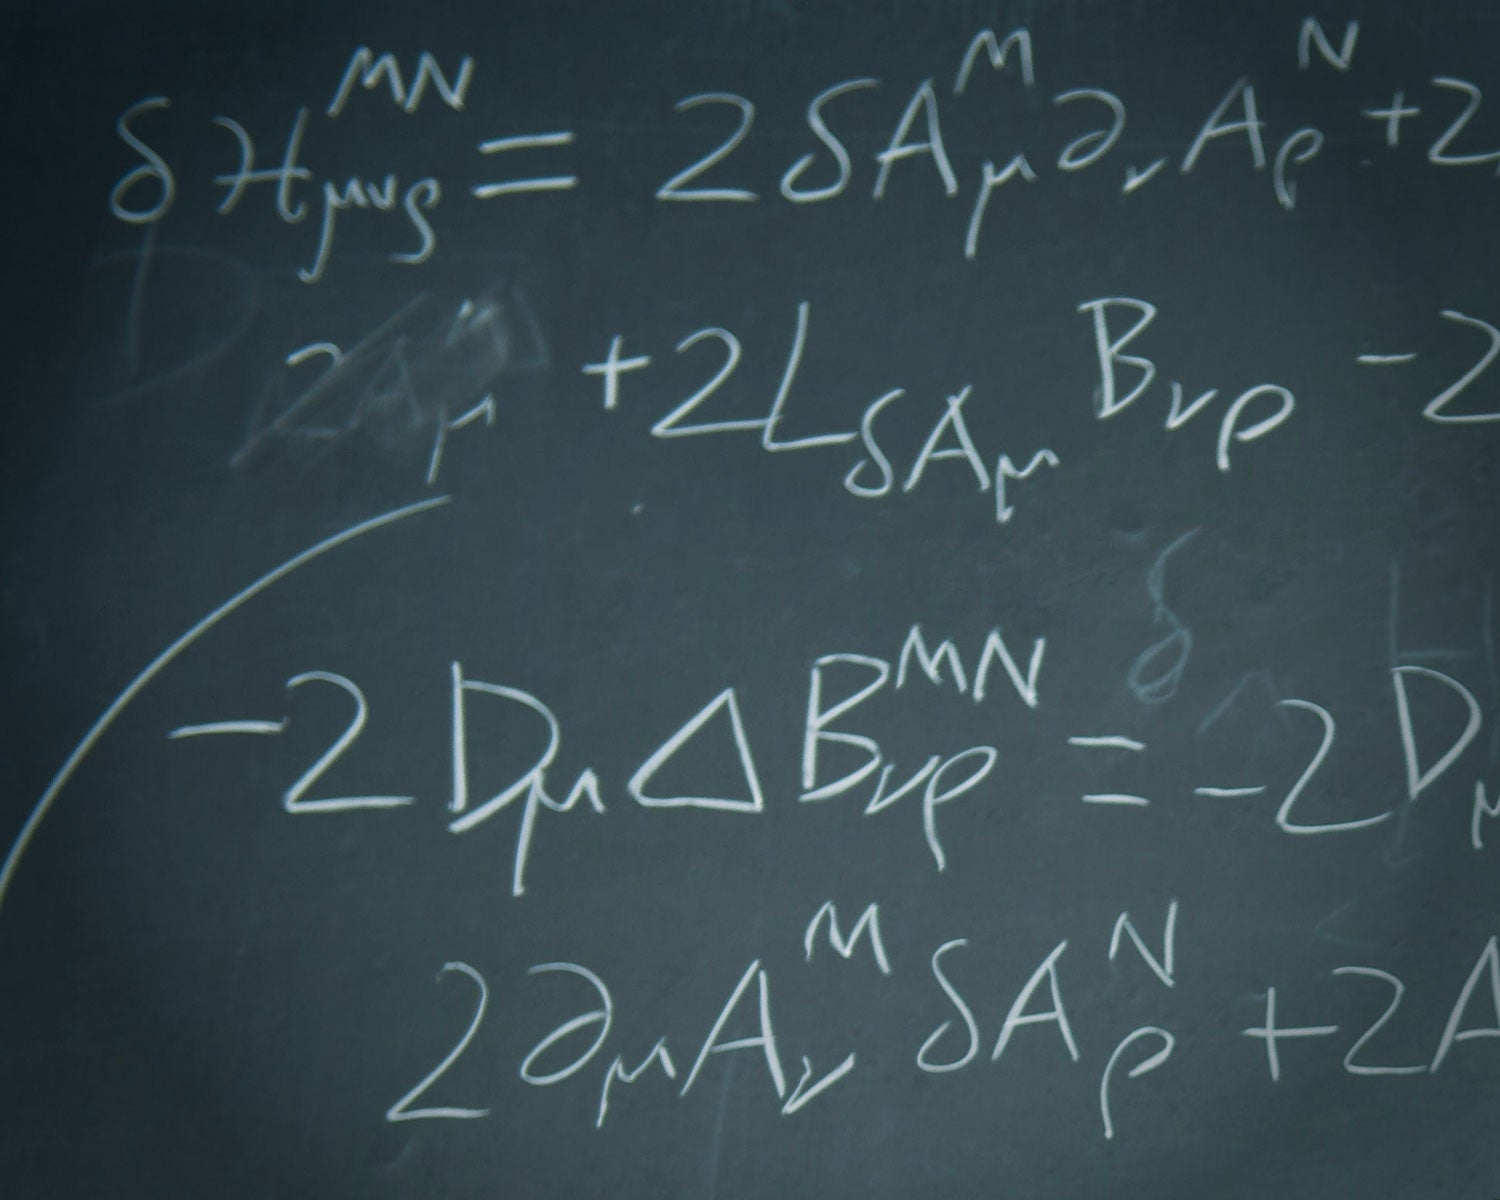 Chalkboard image showing complex equations